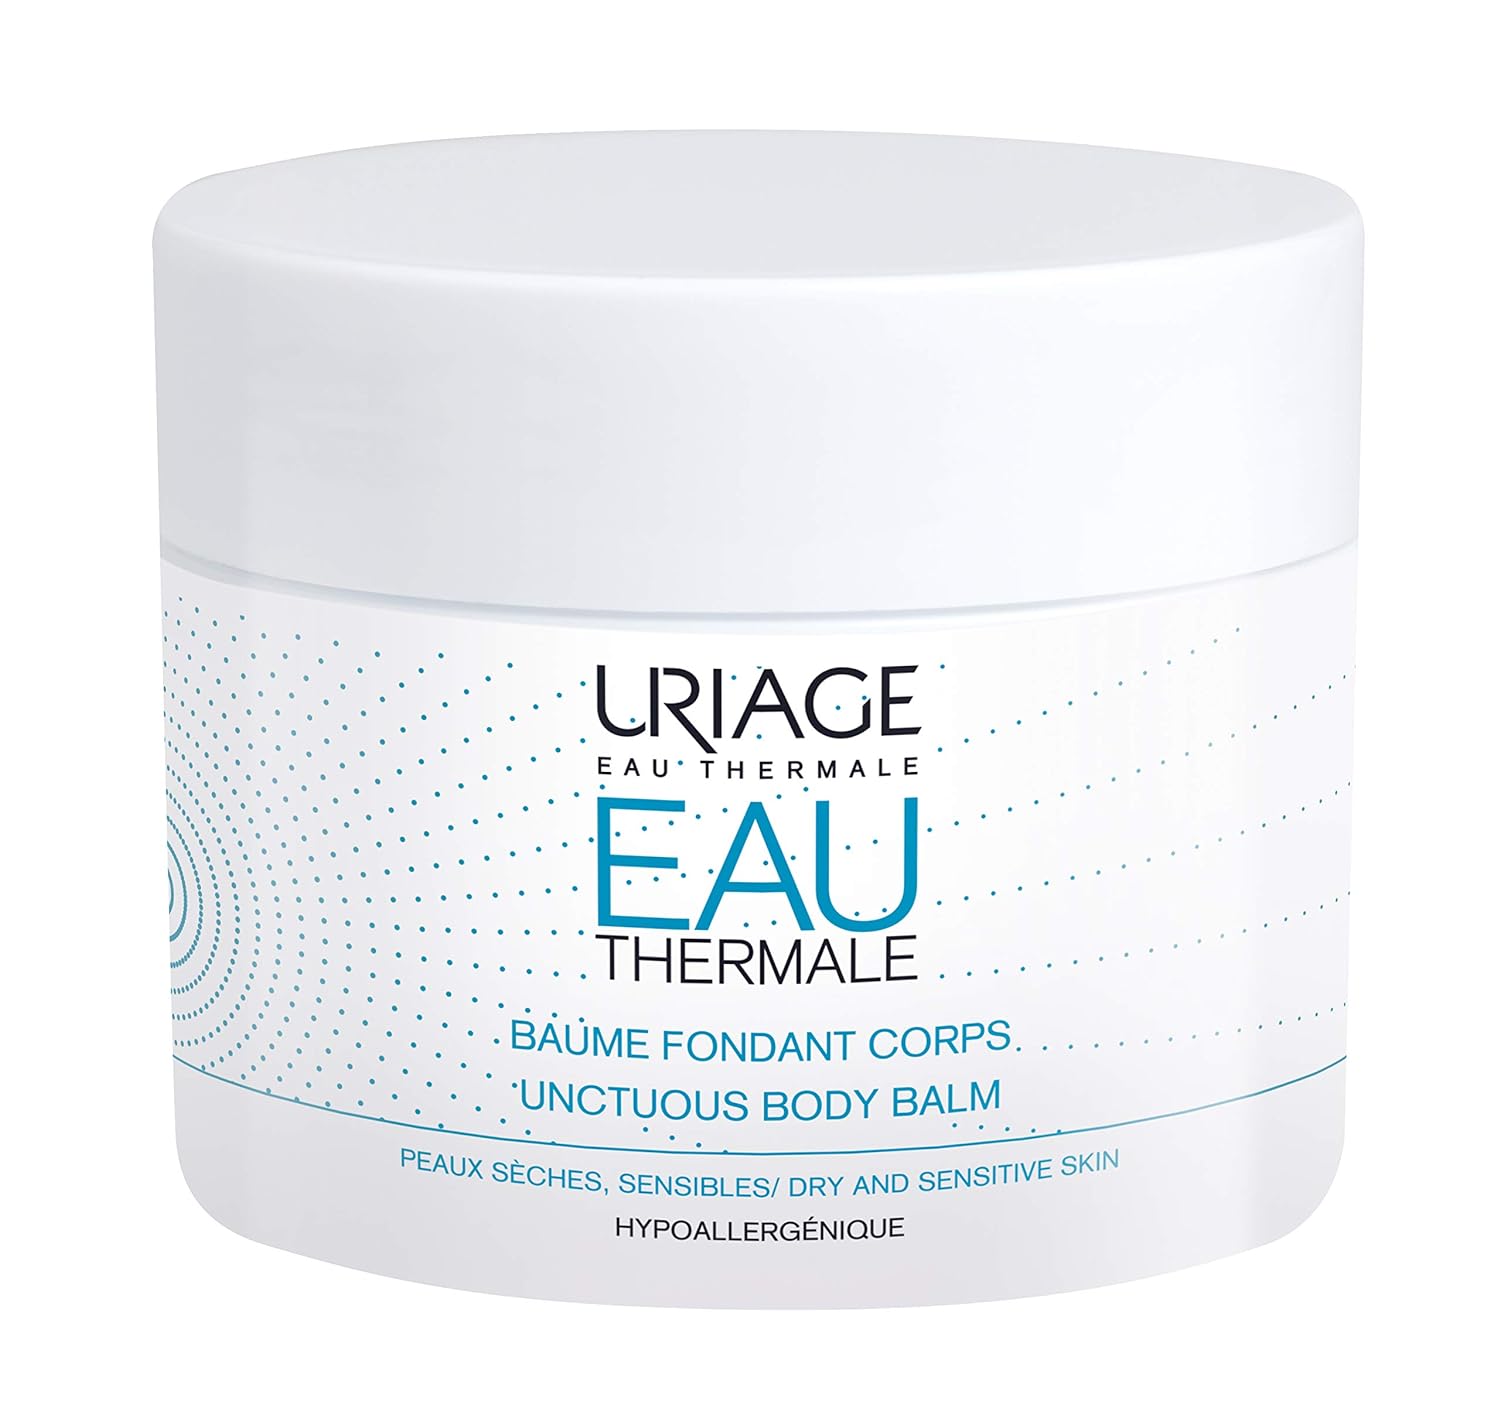 URIAGE Thermal Water Unctuous Body Balm 6.8 .. | Hydrating Body Moisturizer with Hyaluronic Acid and Shea Butter for Dry To Extra Dry Skin | Nourishes and Improves firmness of the Skin for 24hr